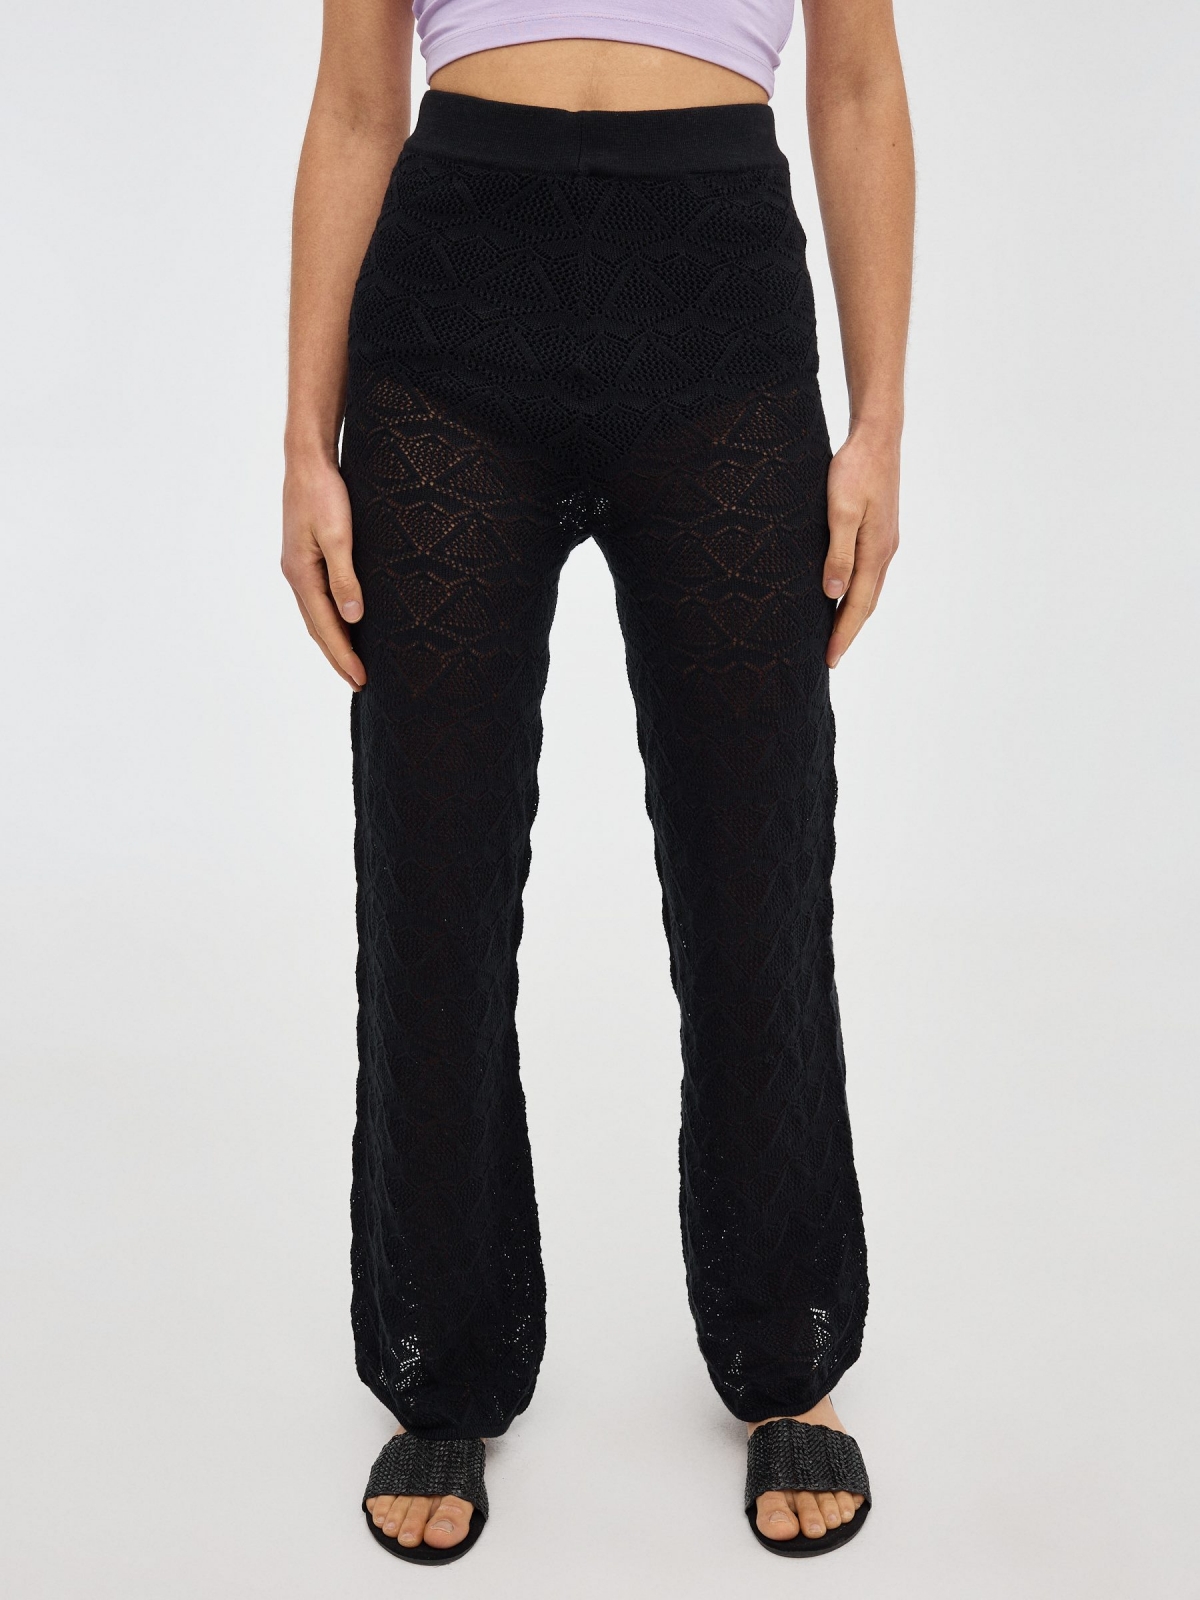 Crochet flare pants black middle front view